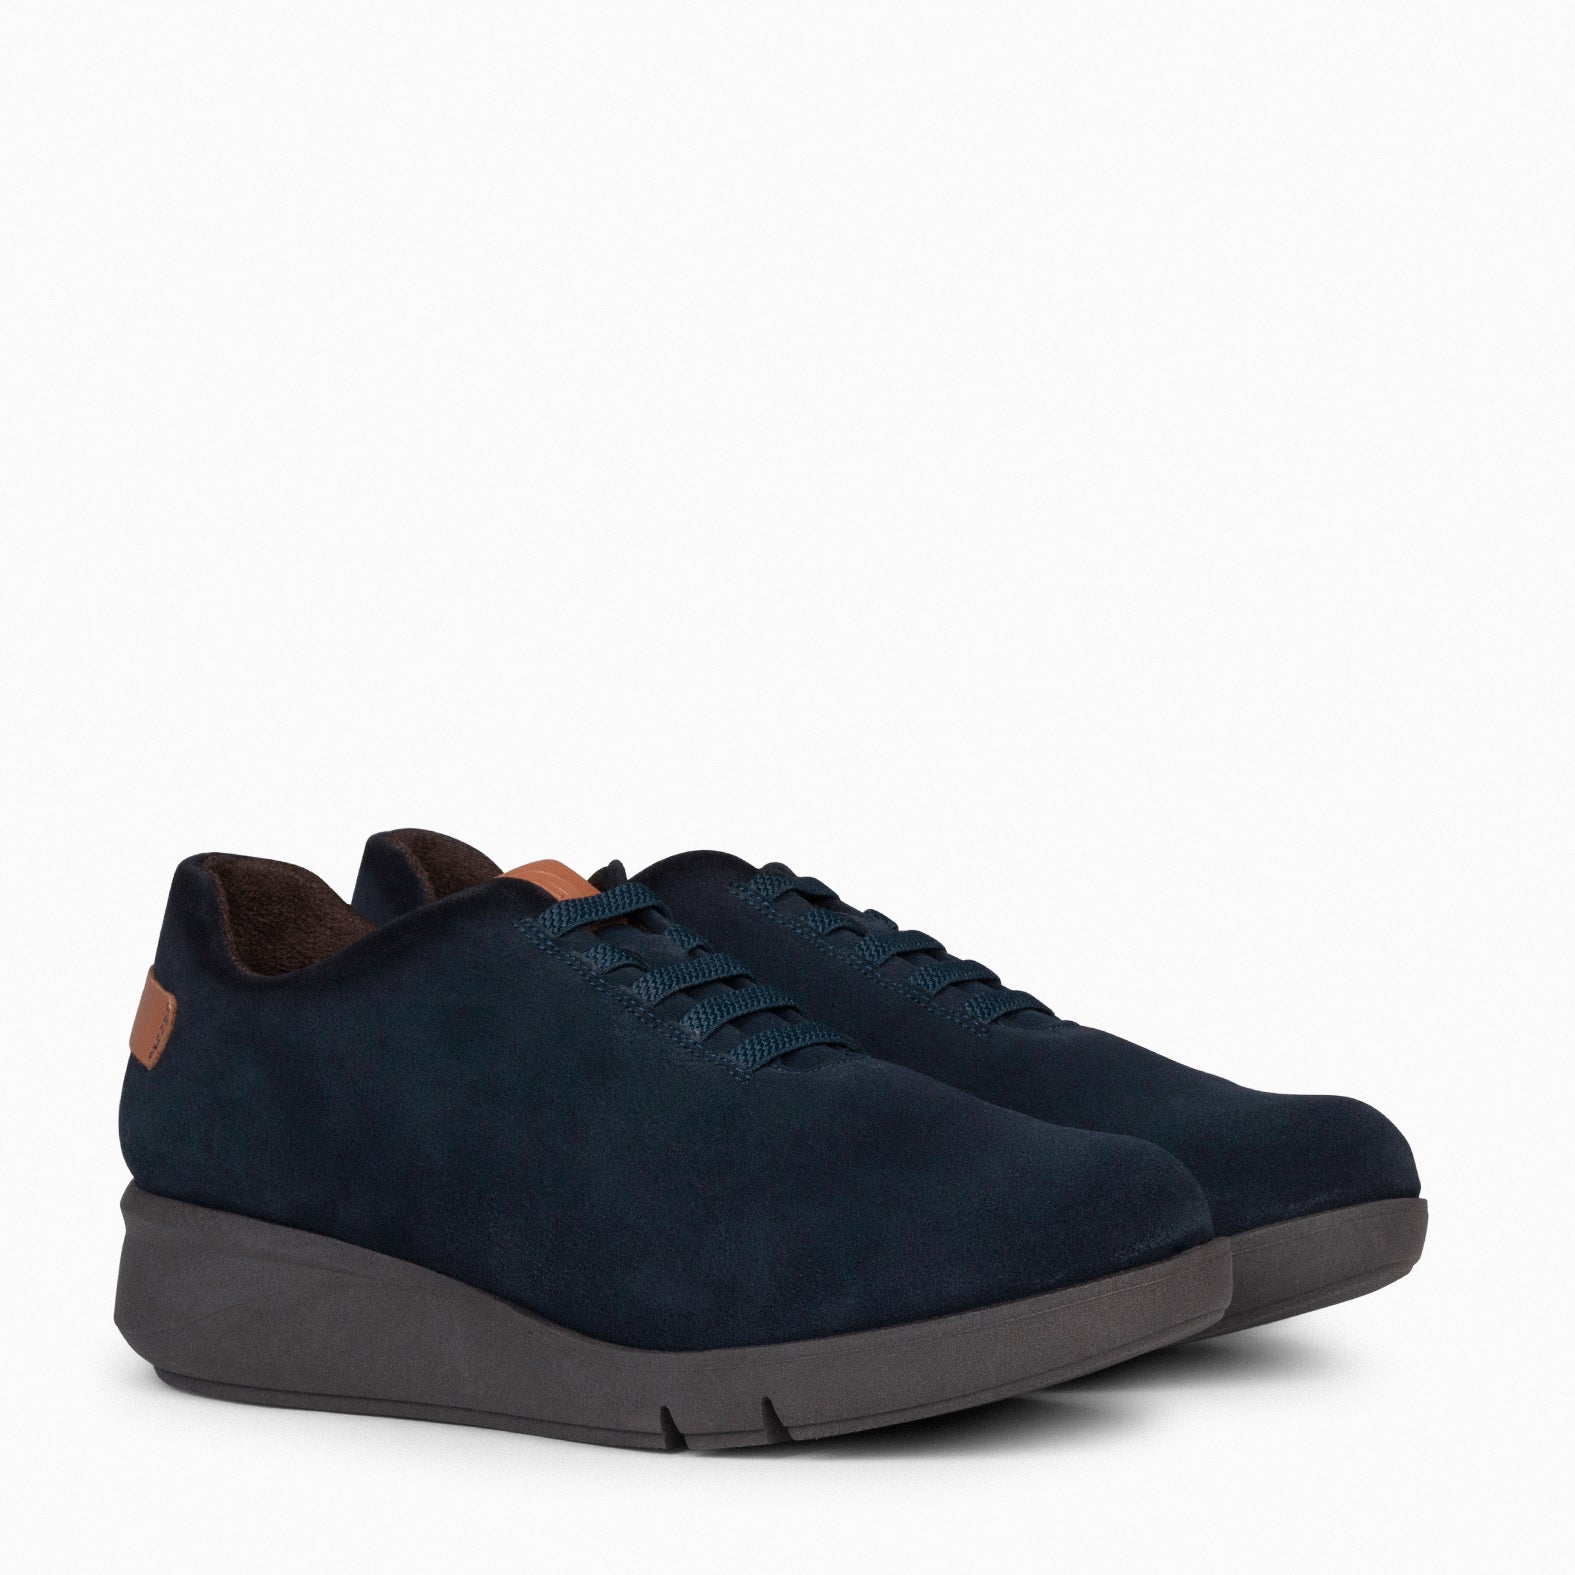 FLY - NAVY sneaker with wedge